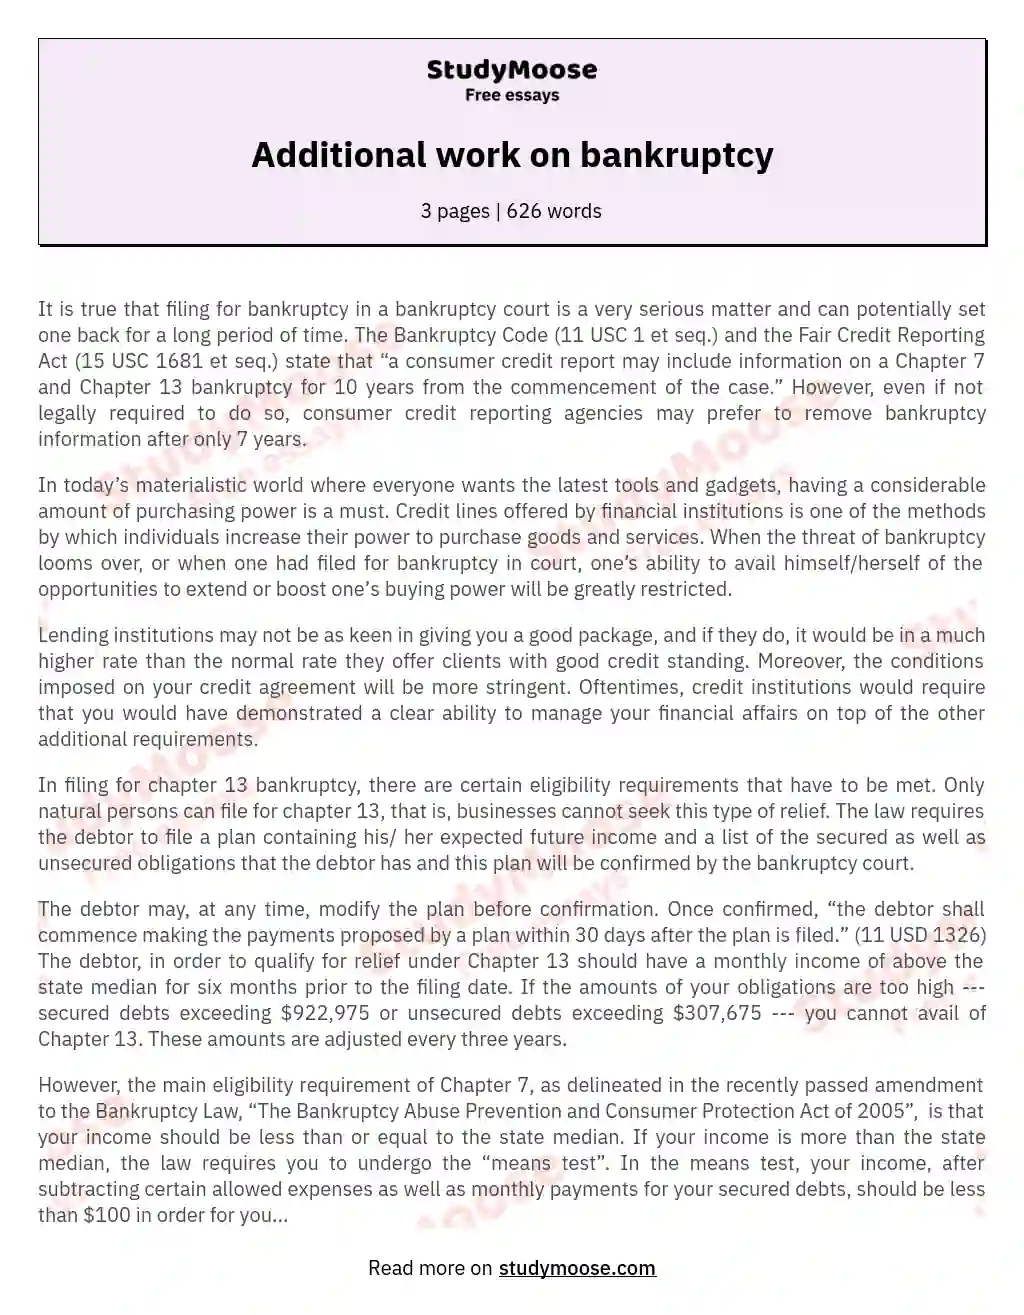 Additional work on bankruptcy essay